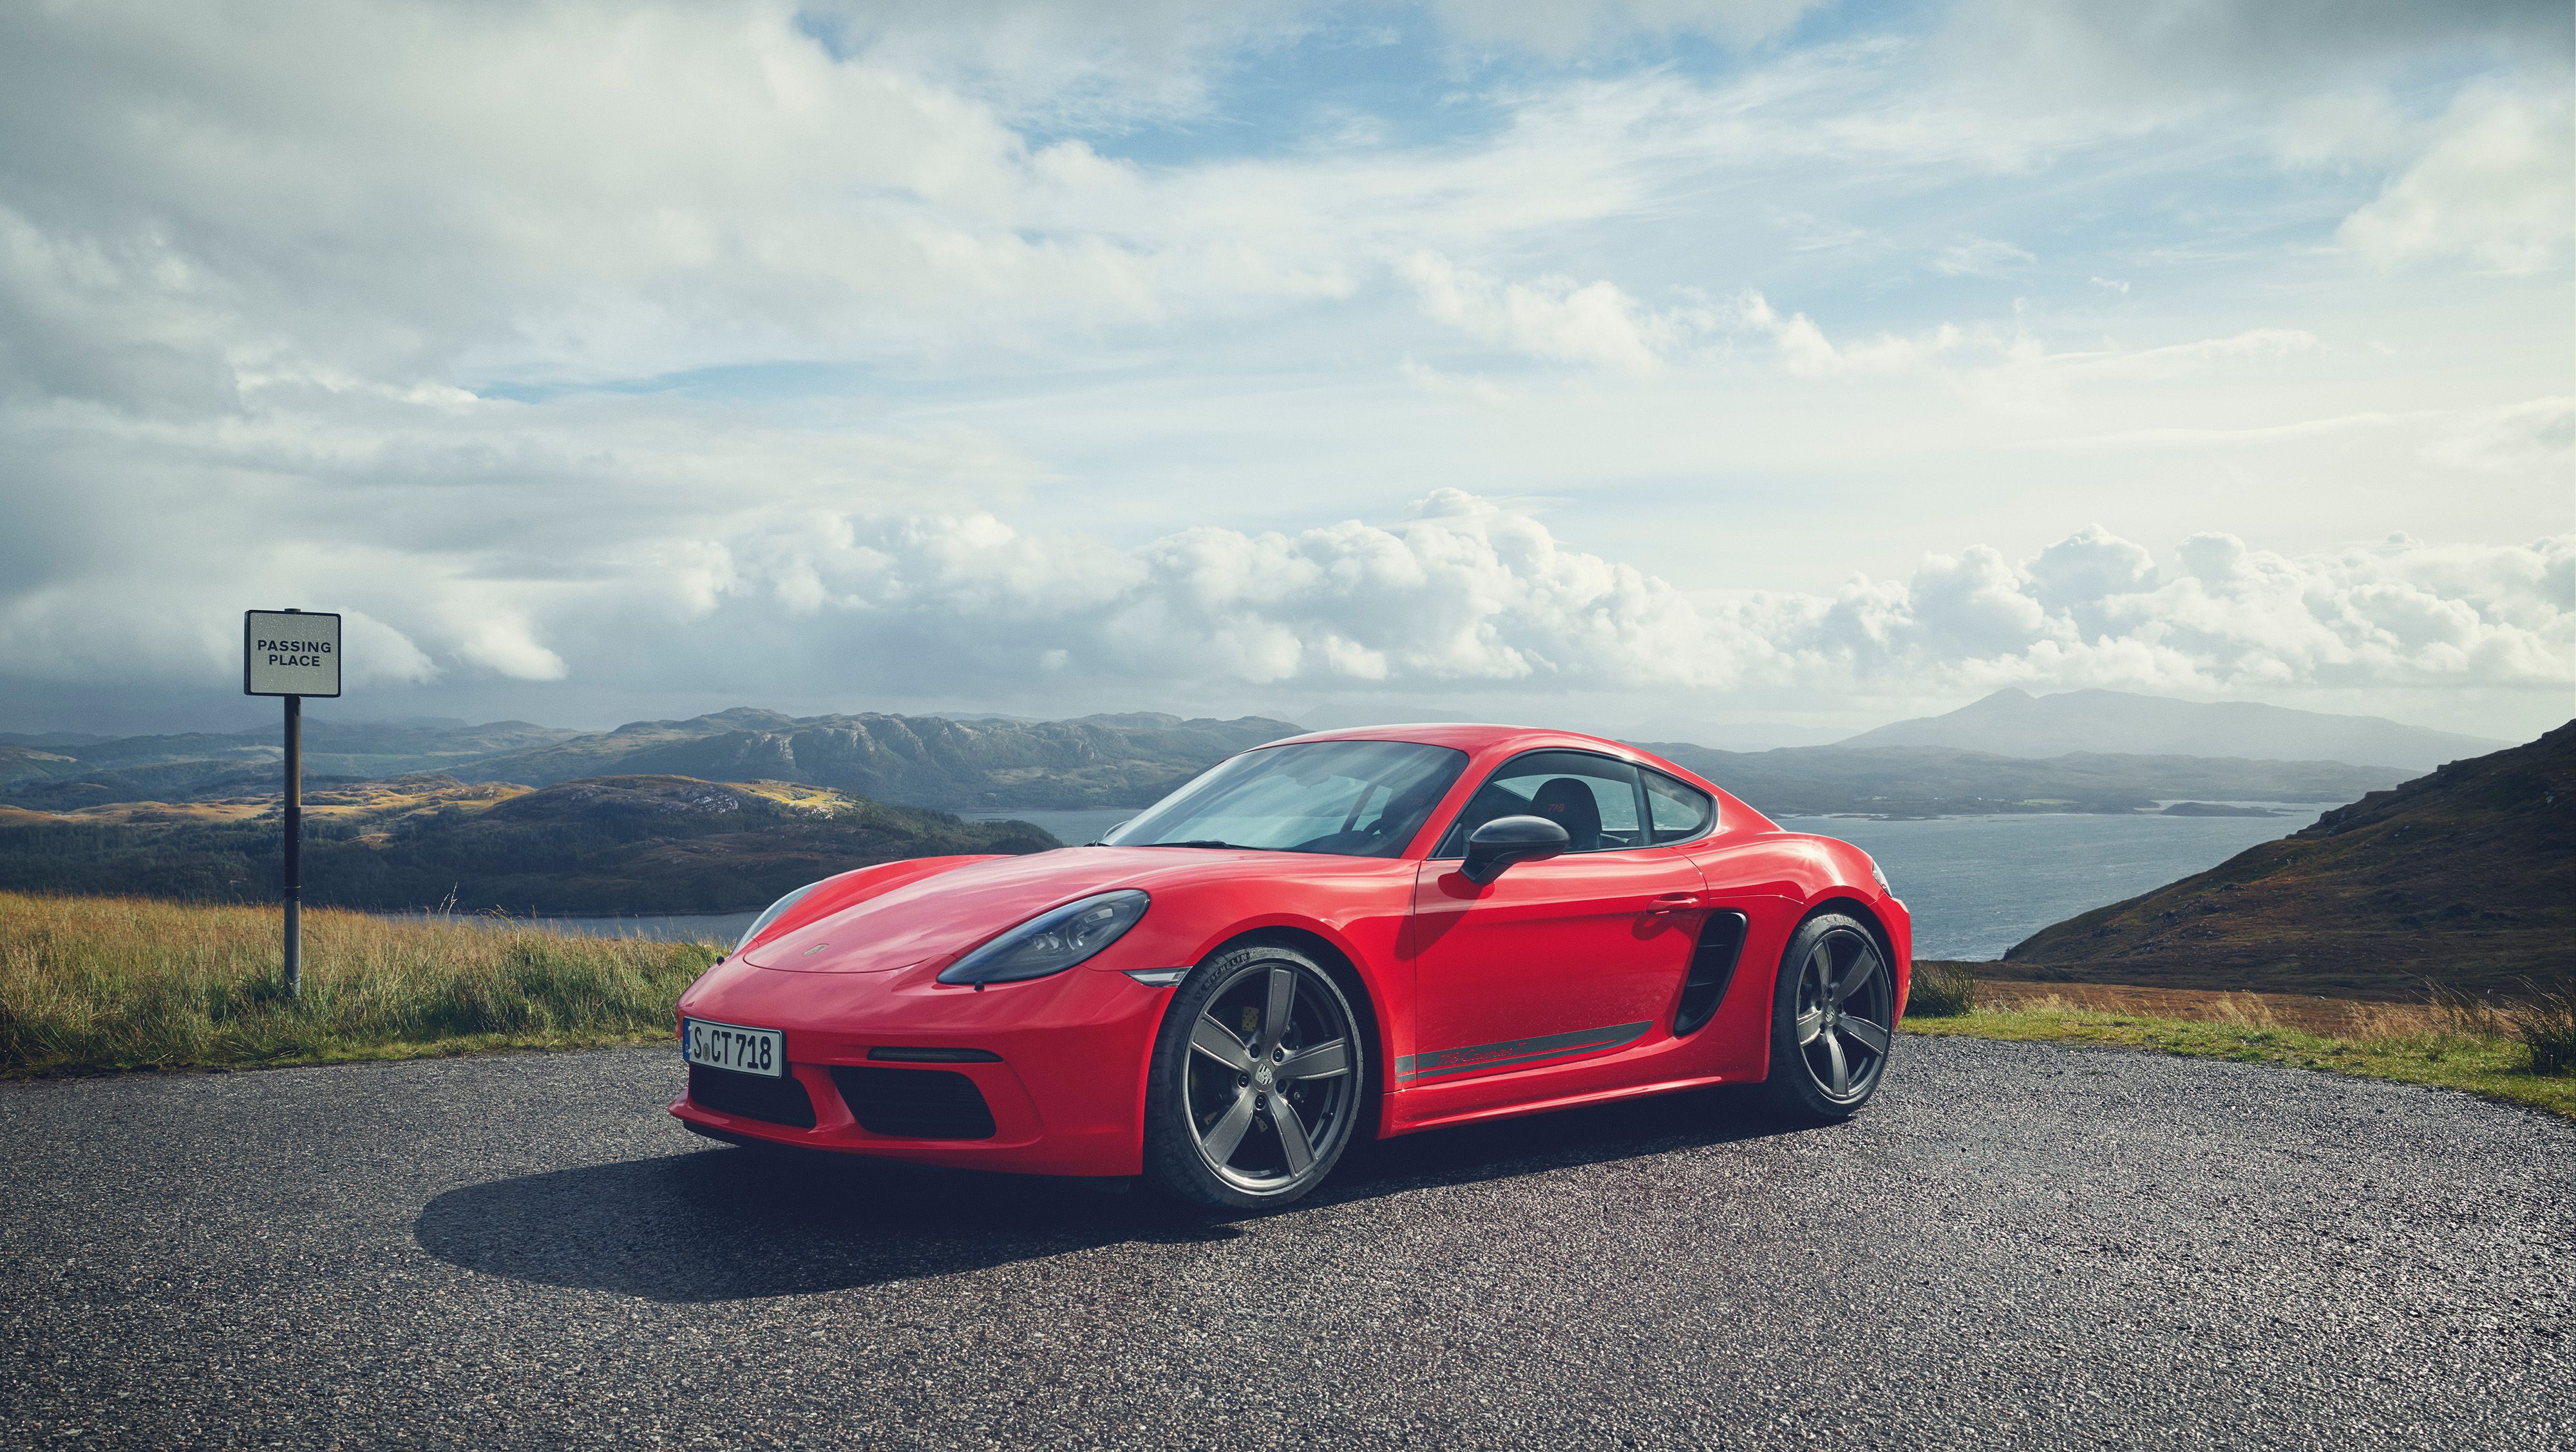 2020 Porsche 718 Cayman Review, Pricing, and Specs